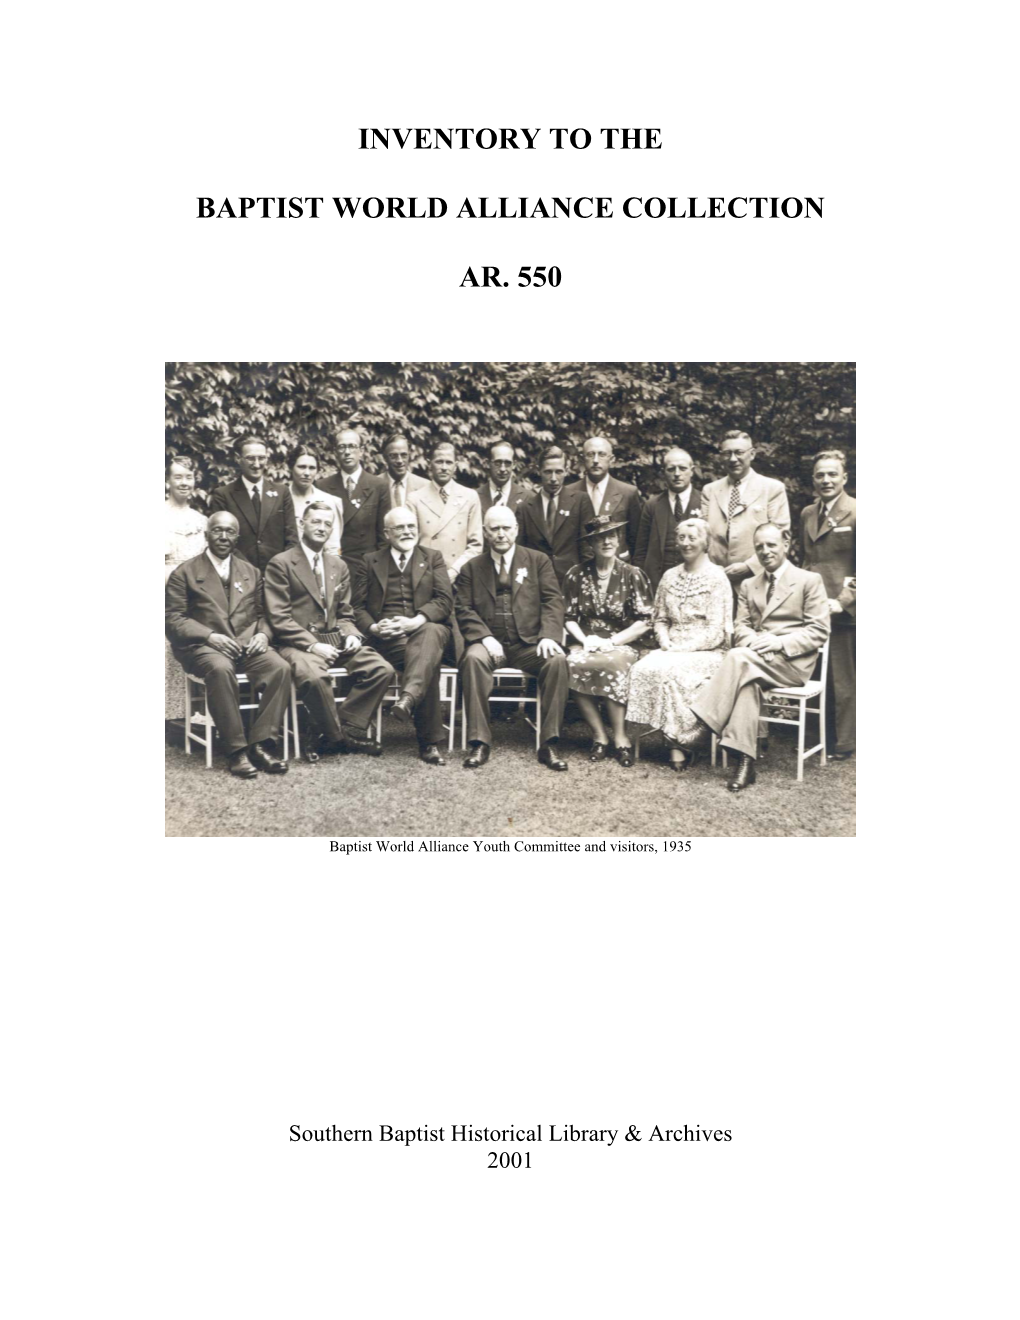 Inventory to the Baptist World Alliance Collection